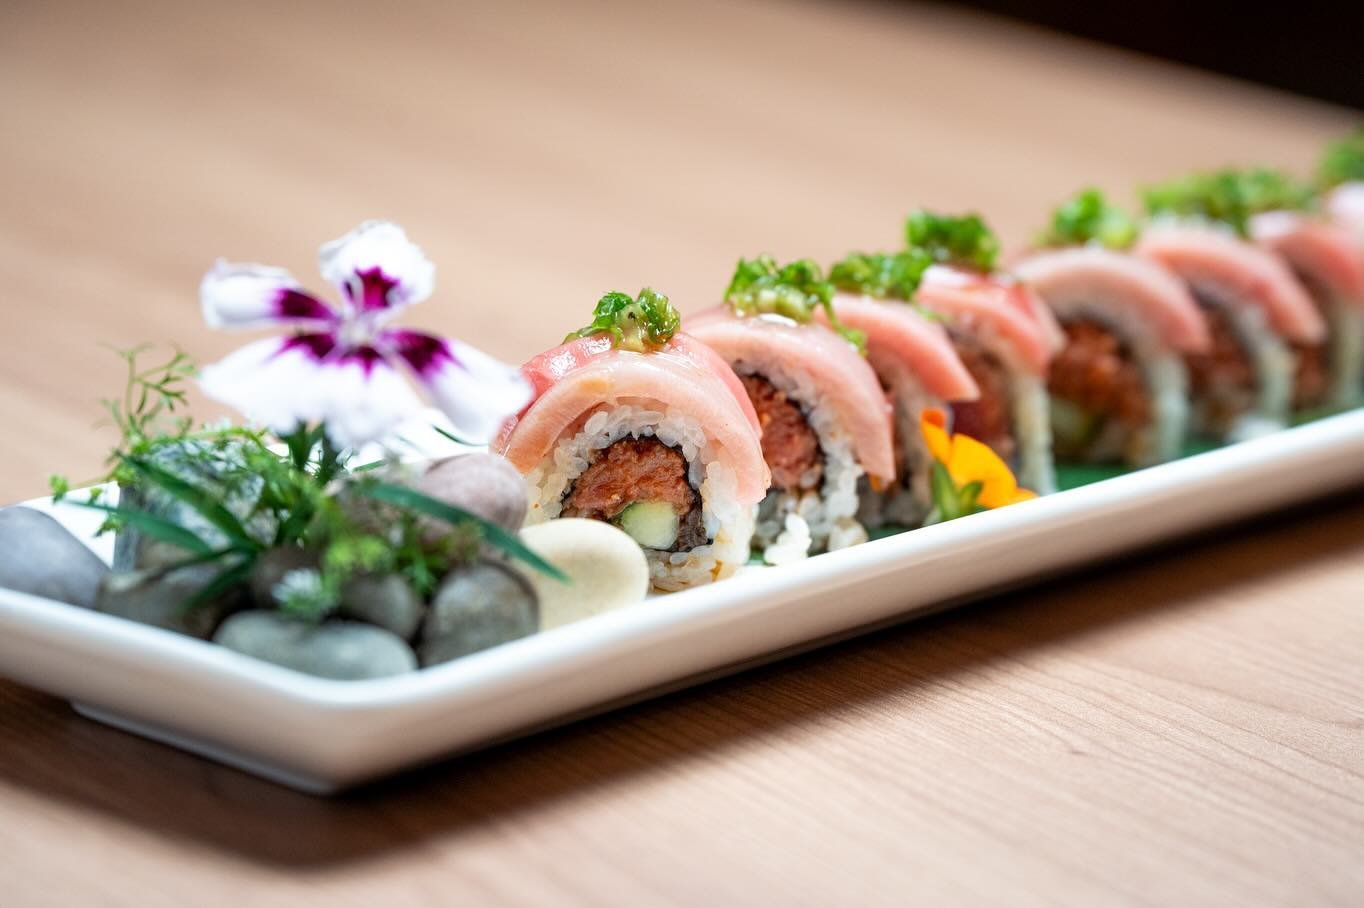 Enjoy the luxurious flavors of our Toro Roll, featuring spicy tuna, cucumber, truffle sauce, green onion, and a tantalizing truffle ponzu drizzle. 🍣✨

&bull;

&bull;

&bull;

#nikkosouthlake #southlaketx #southlaketownsquare #southlakelife #southlak